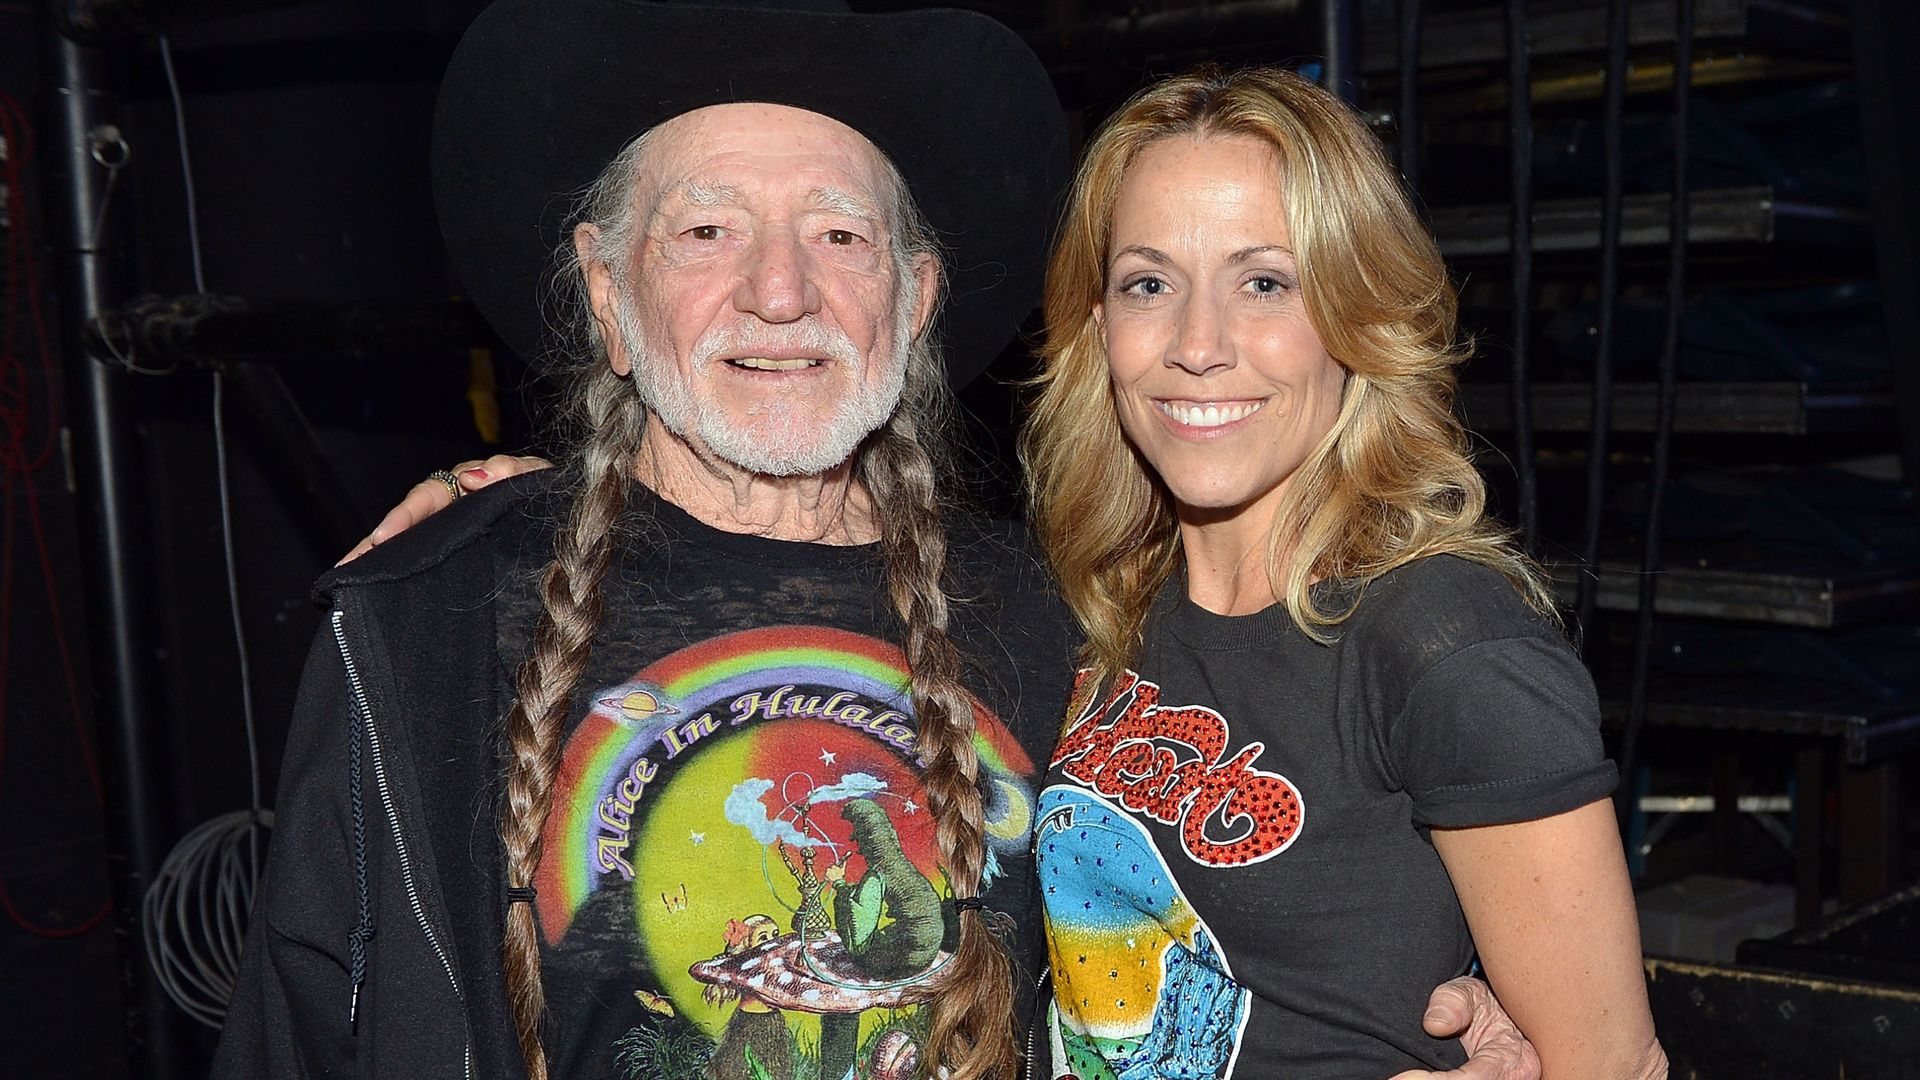 Willie Nelson and Sheryl Crow backstage 